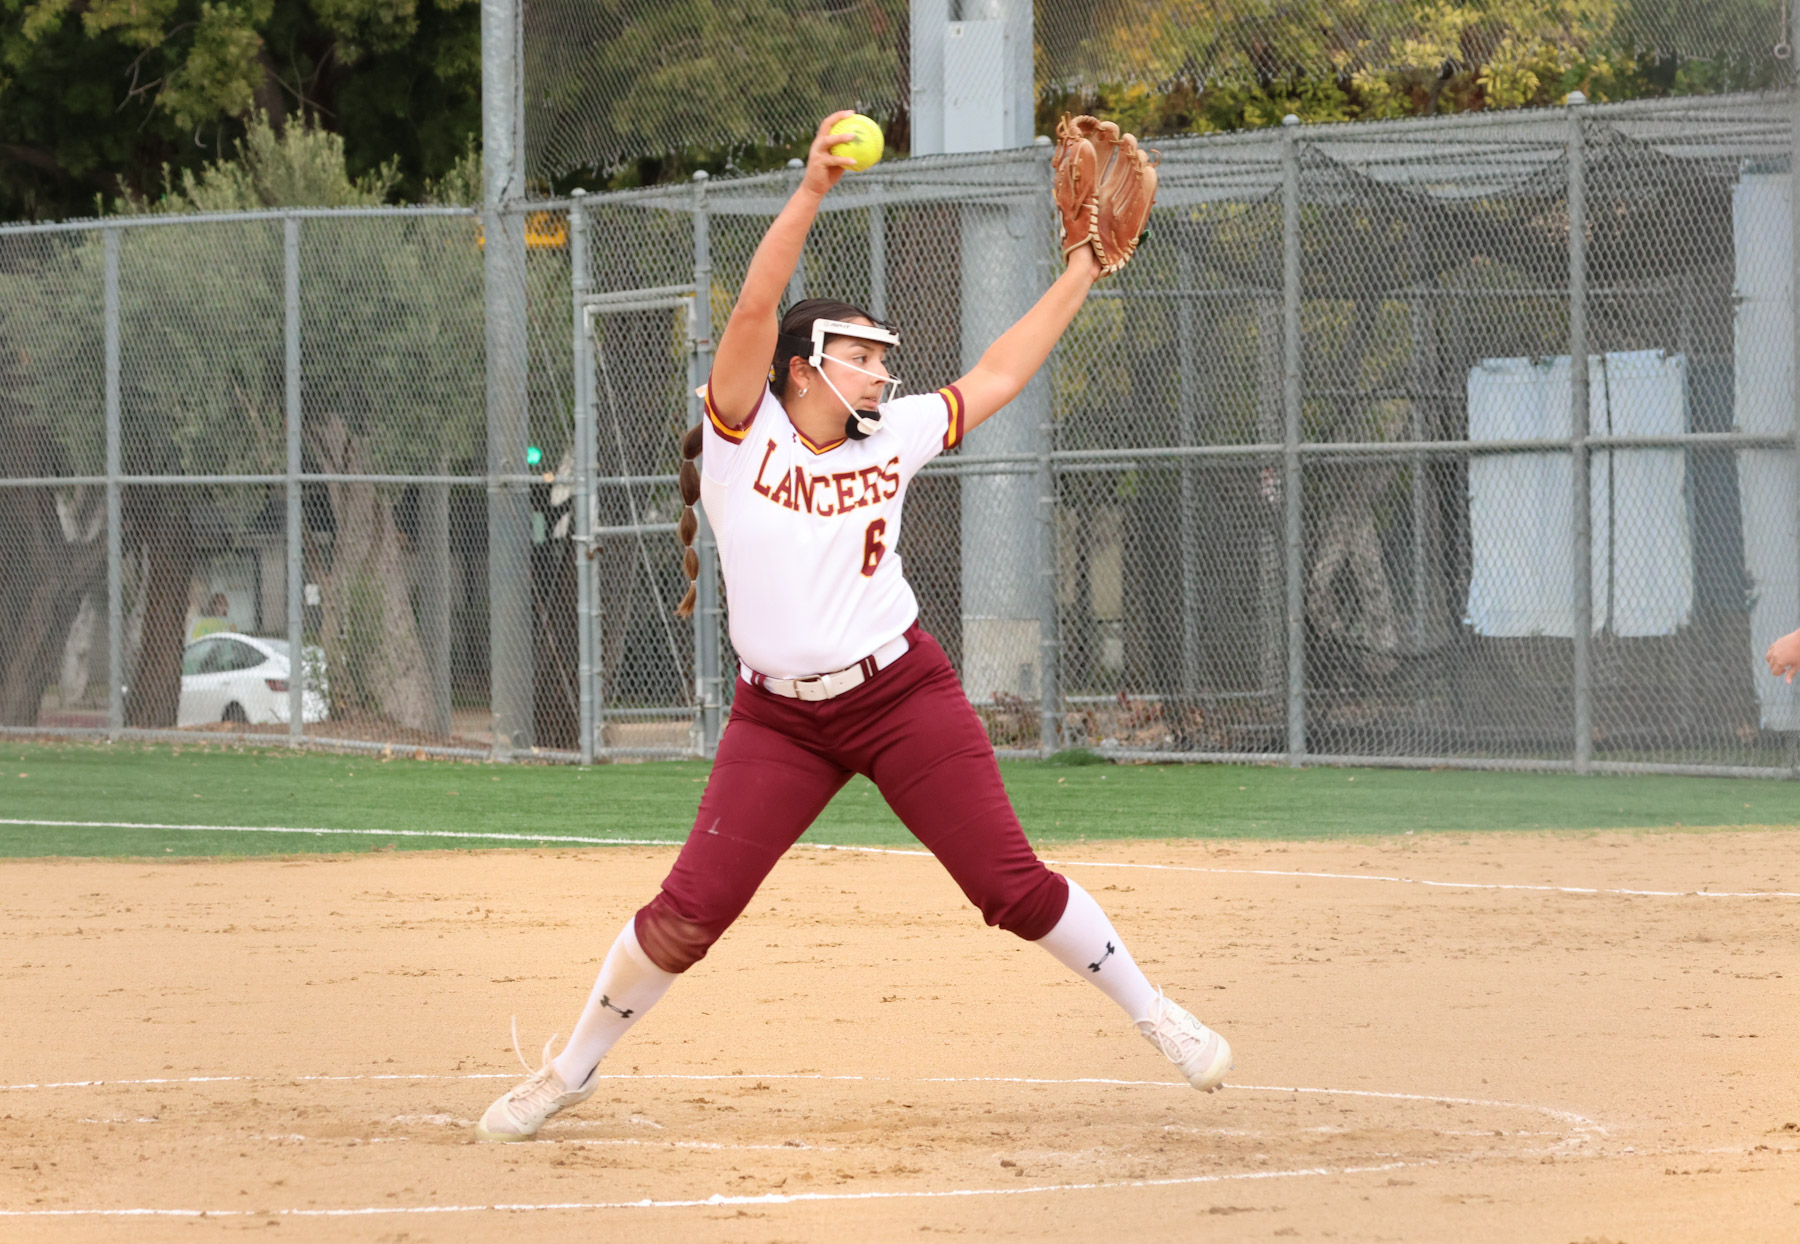 Leiana Rodriguez fires a pitch during a recent game (photo by Richard Quinton).